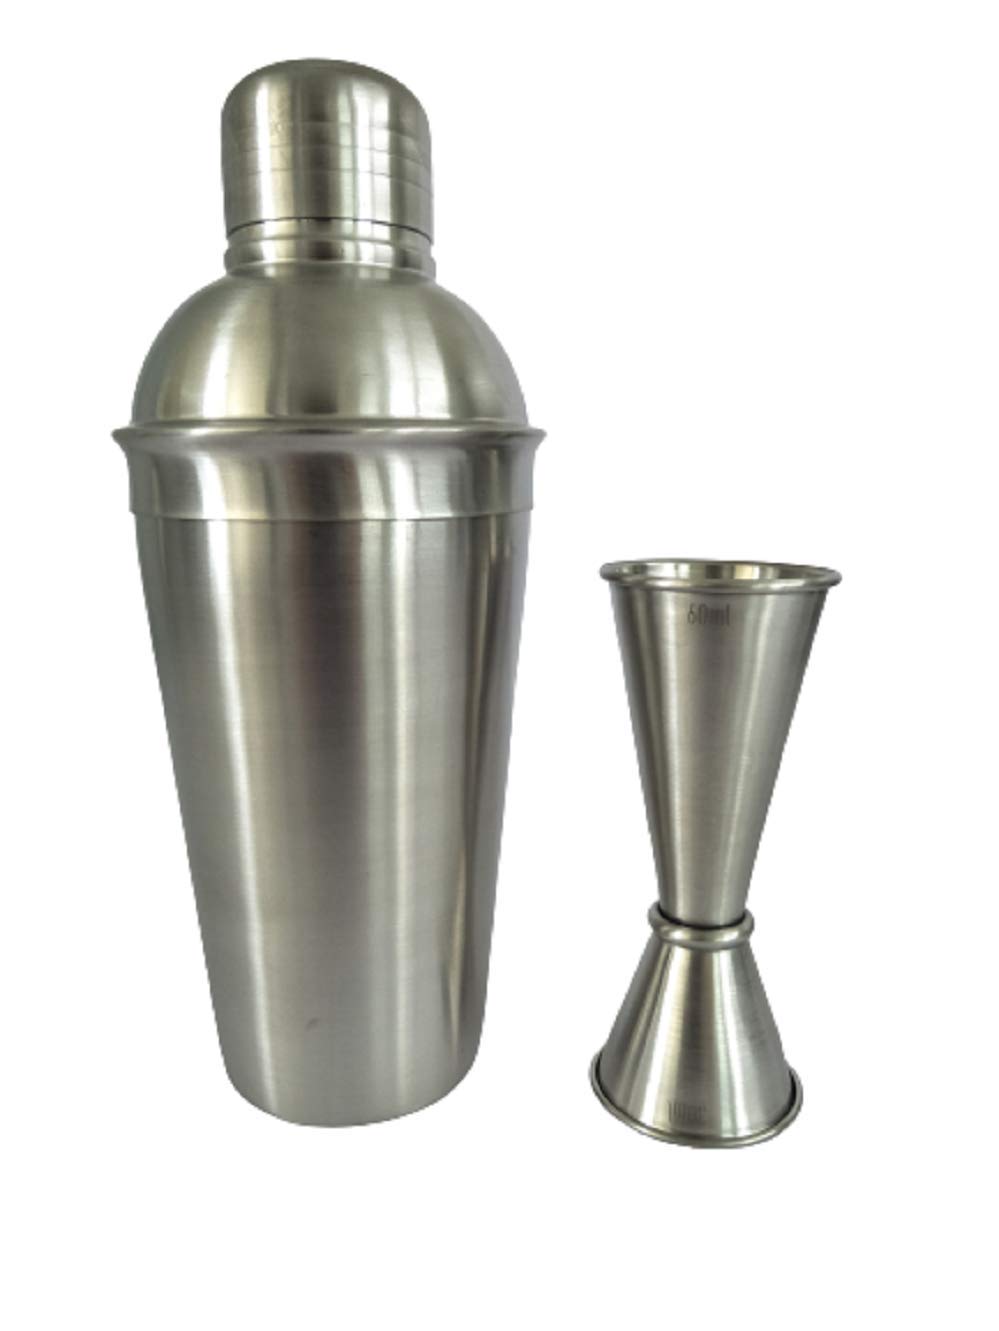 NJ Stainless Steel Cocktail Shaker with Strainer 500 ml, Japanese Style Double Cocktail Jigger, Bar Jigger, Stainless Steel Peg Measure 30-60 ml, Shaker Large Capacity for Drinks Bar Home Use